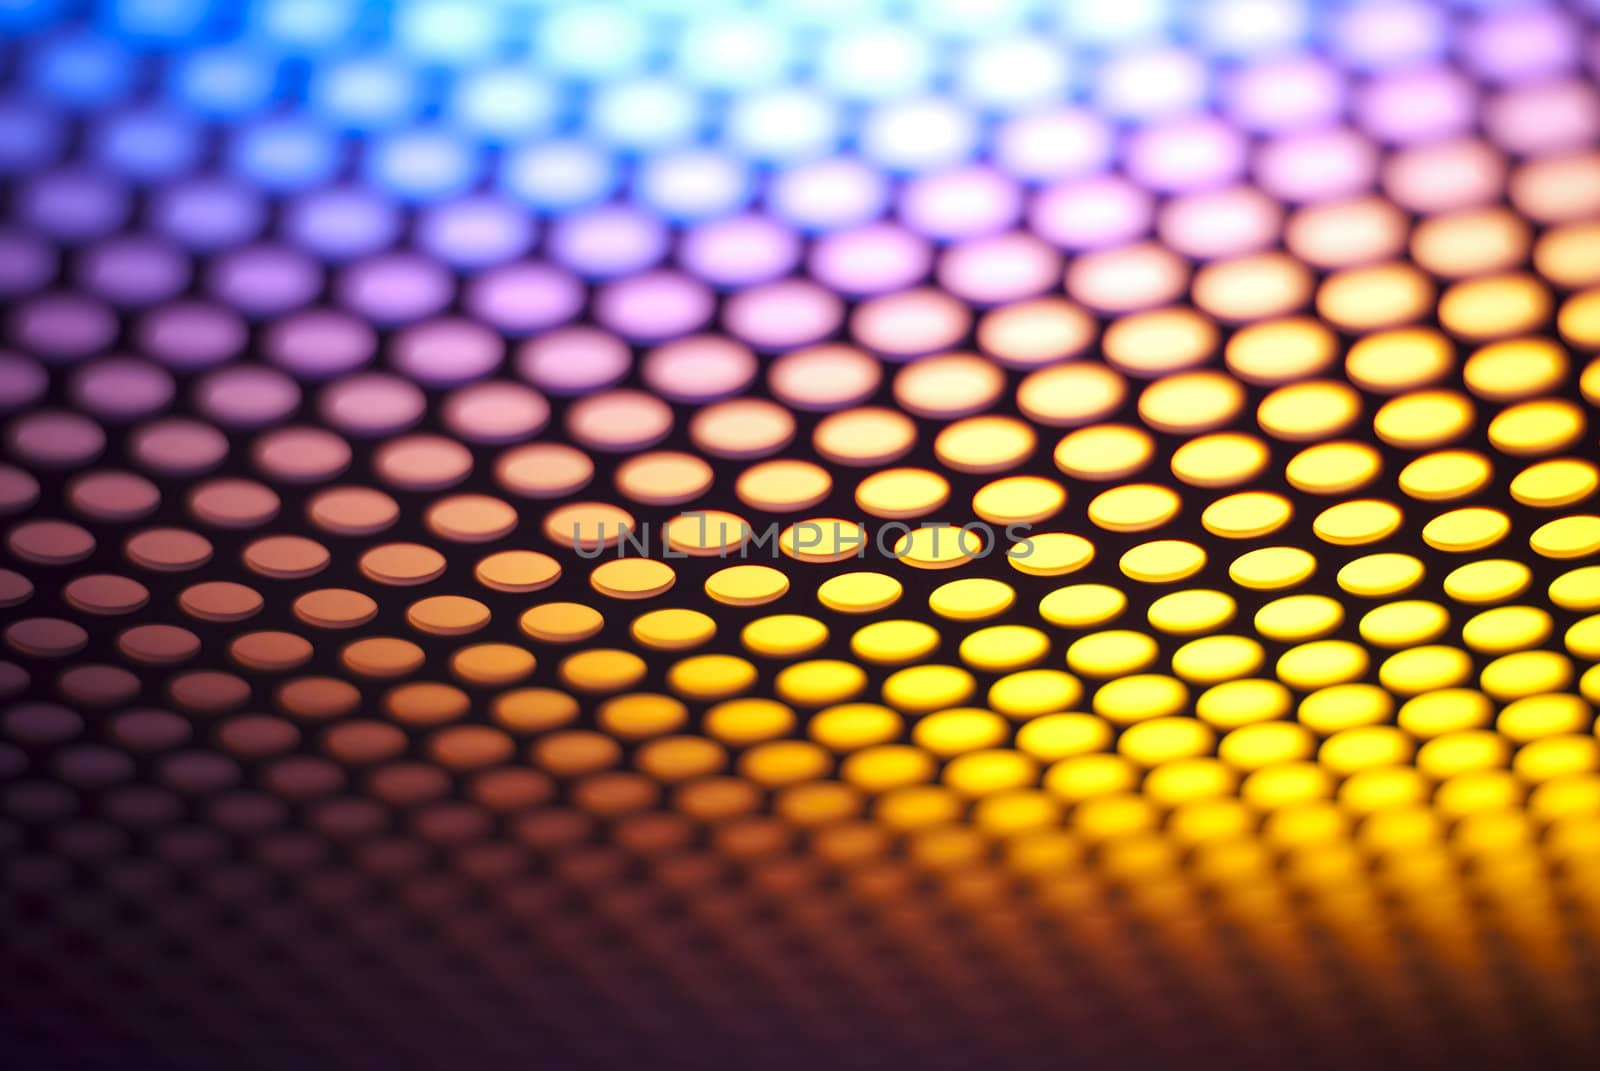 A metalic reflective surface back lit by a colorful light.